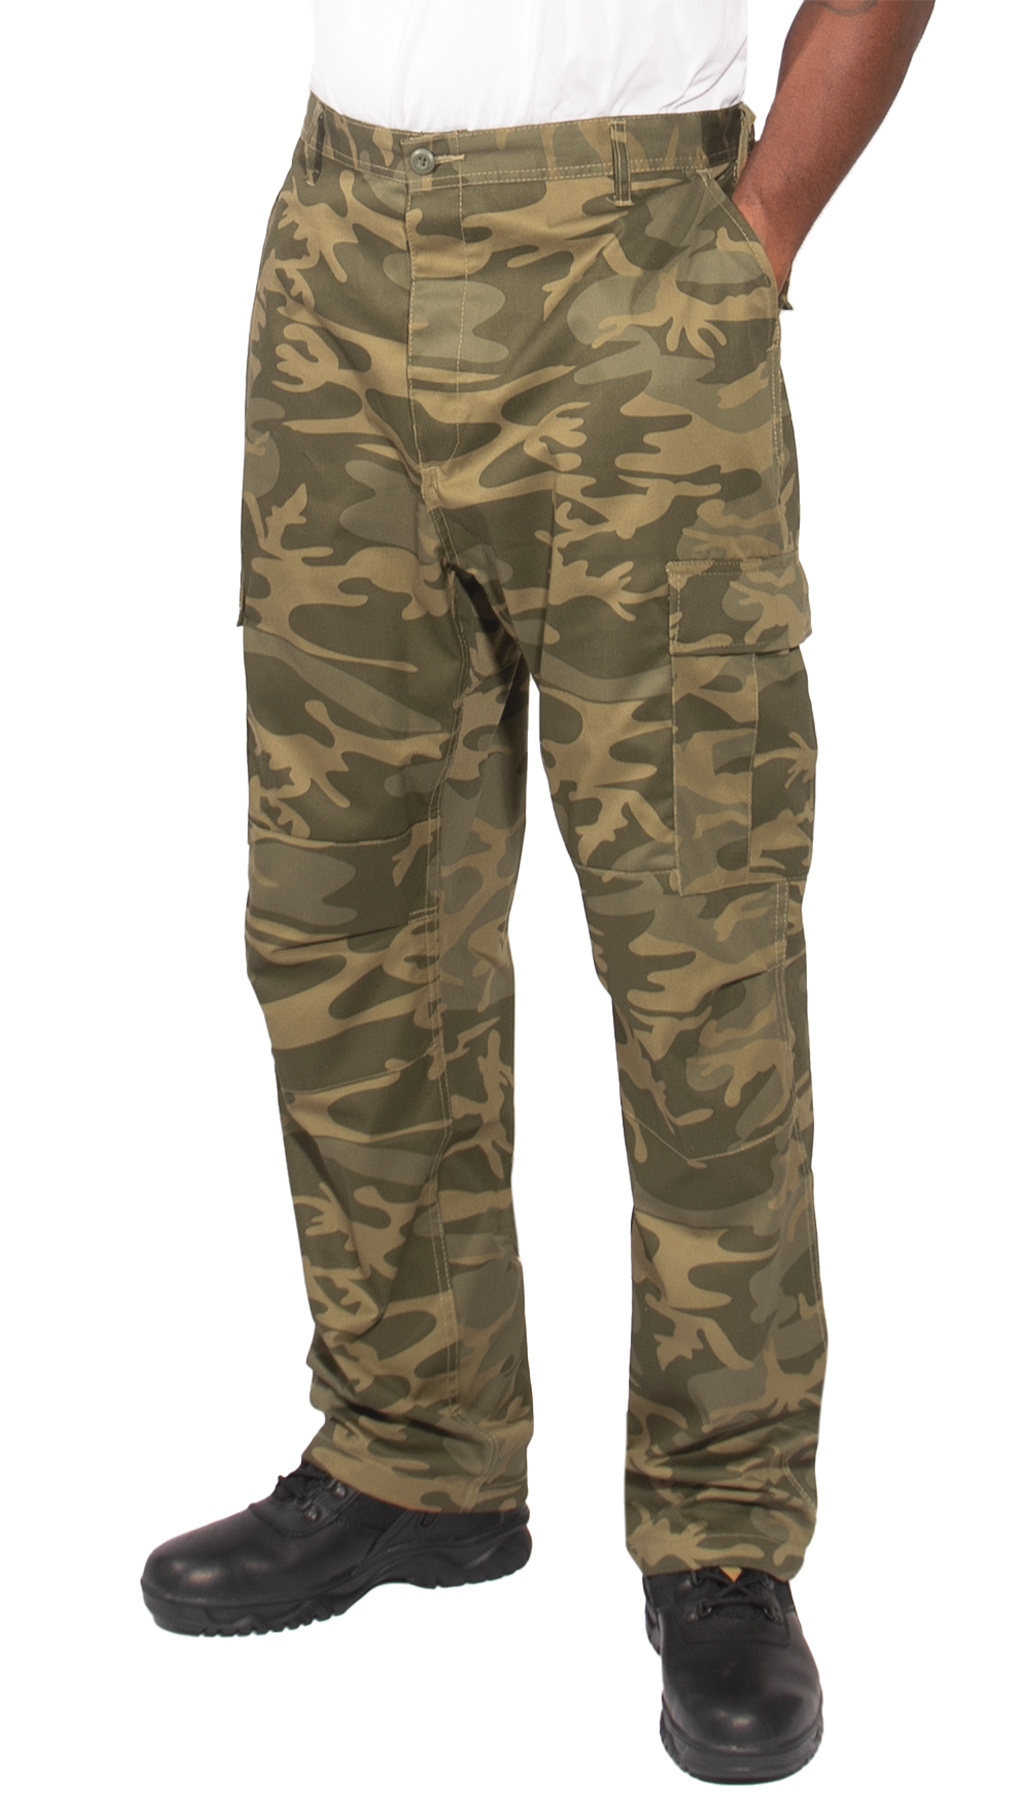 Rothco Vintage Coyote Camouflage Pants - Army Supply Store Military